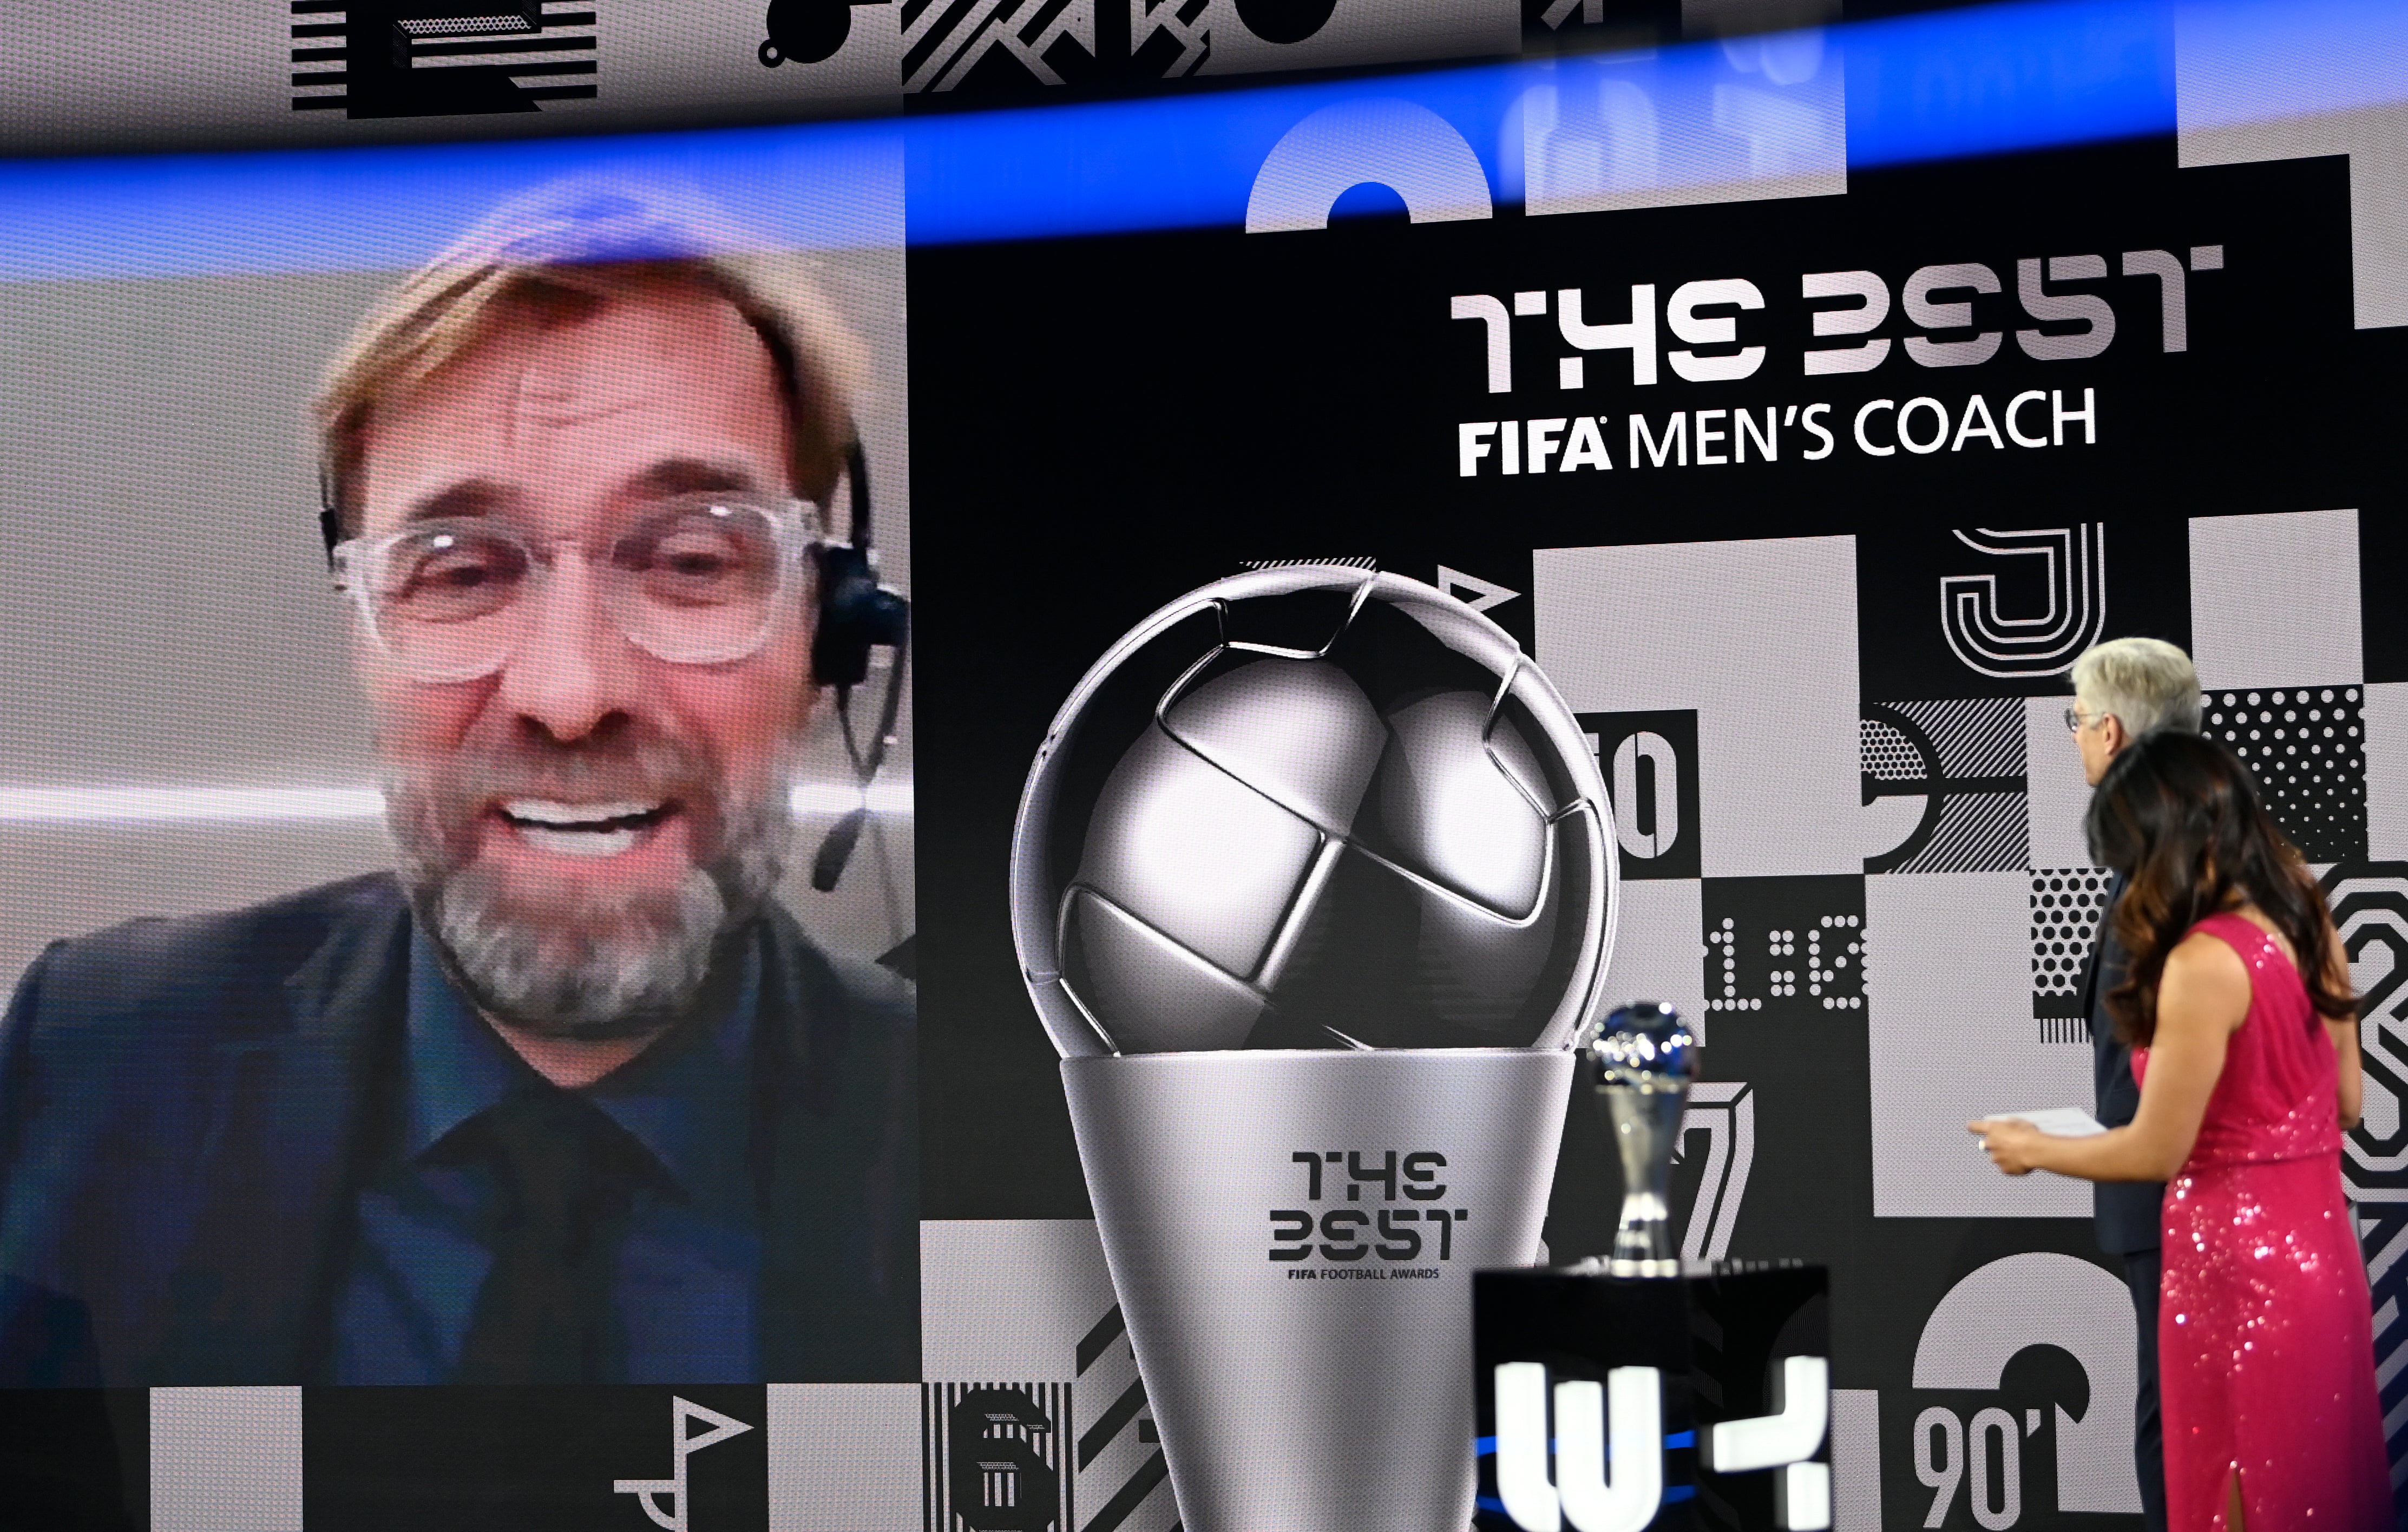 Klopp was crowned Fifa Best men’s coach of the year